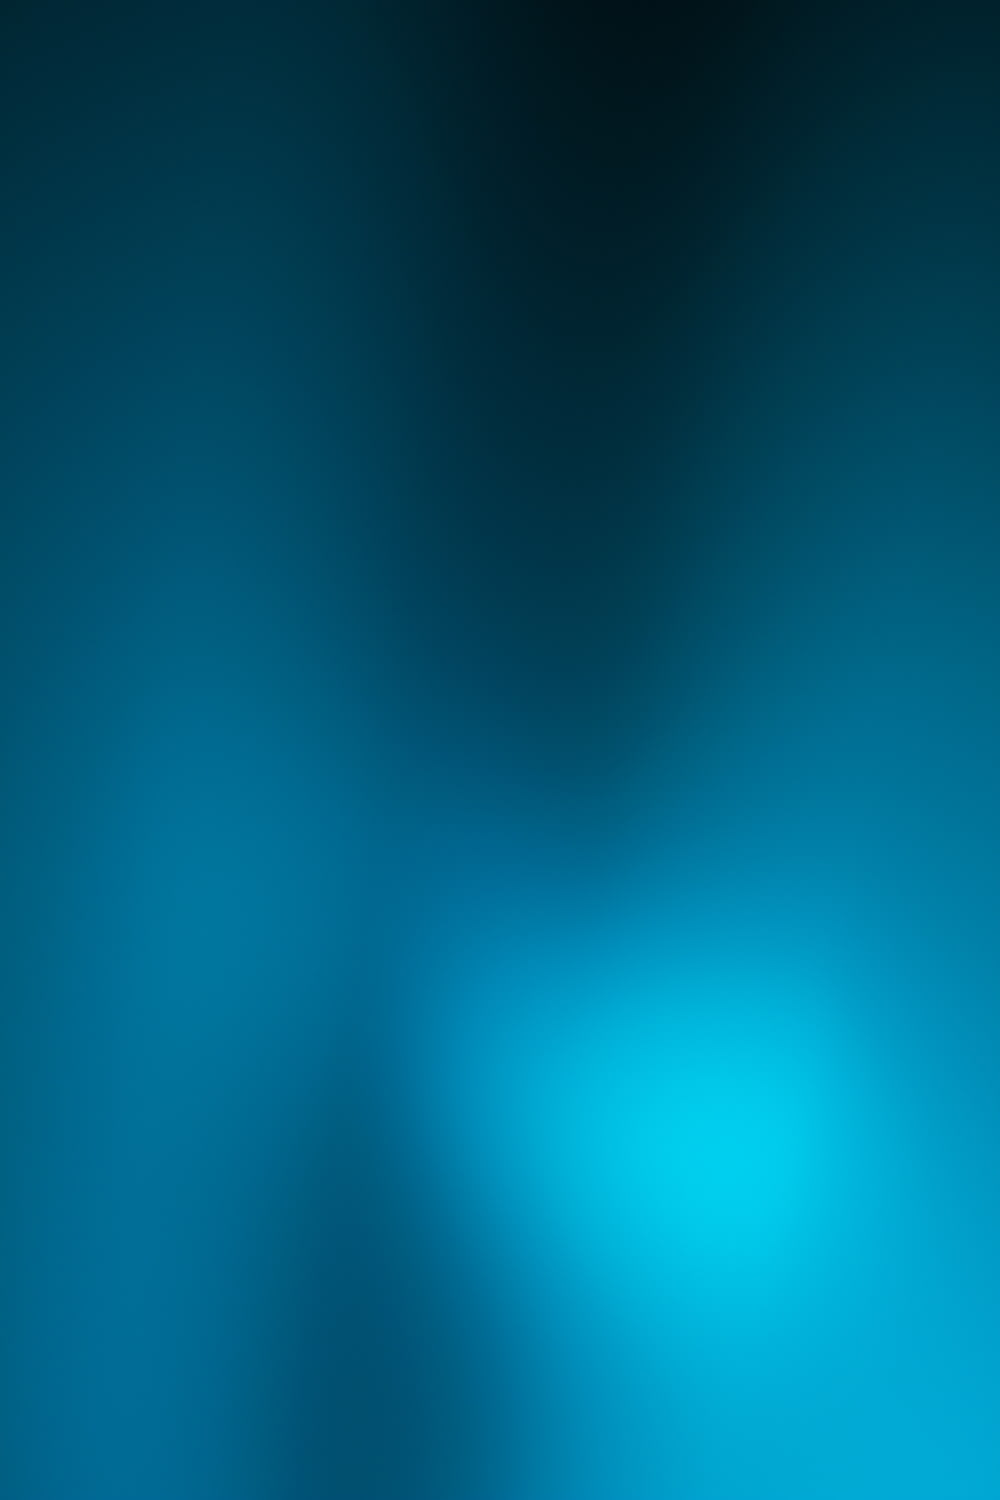 a blurry image of a blue background